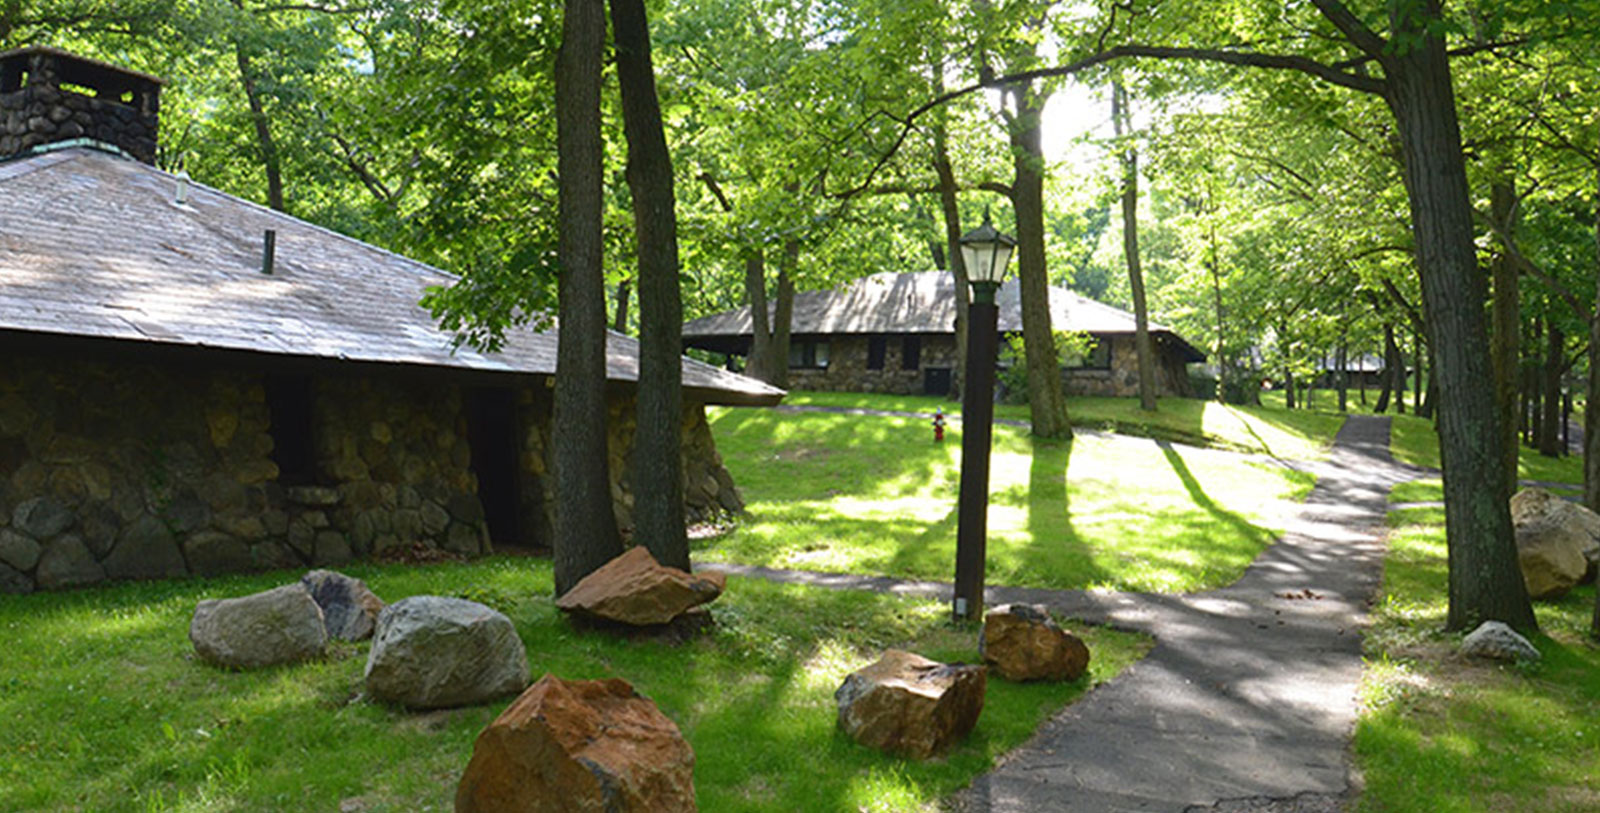 Experience deer, bears, coyotes and more at the Bear Mountain’s Trailside Museums & Zoo.